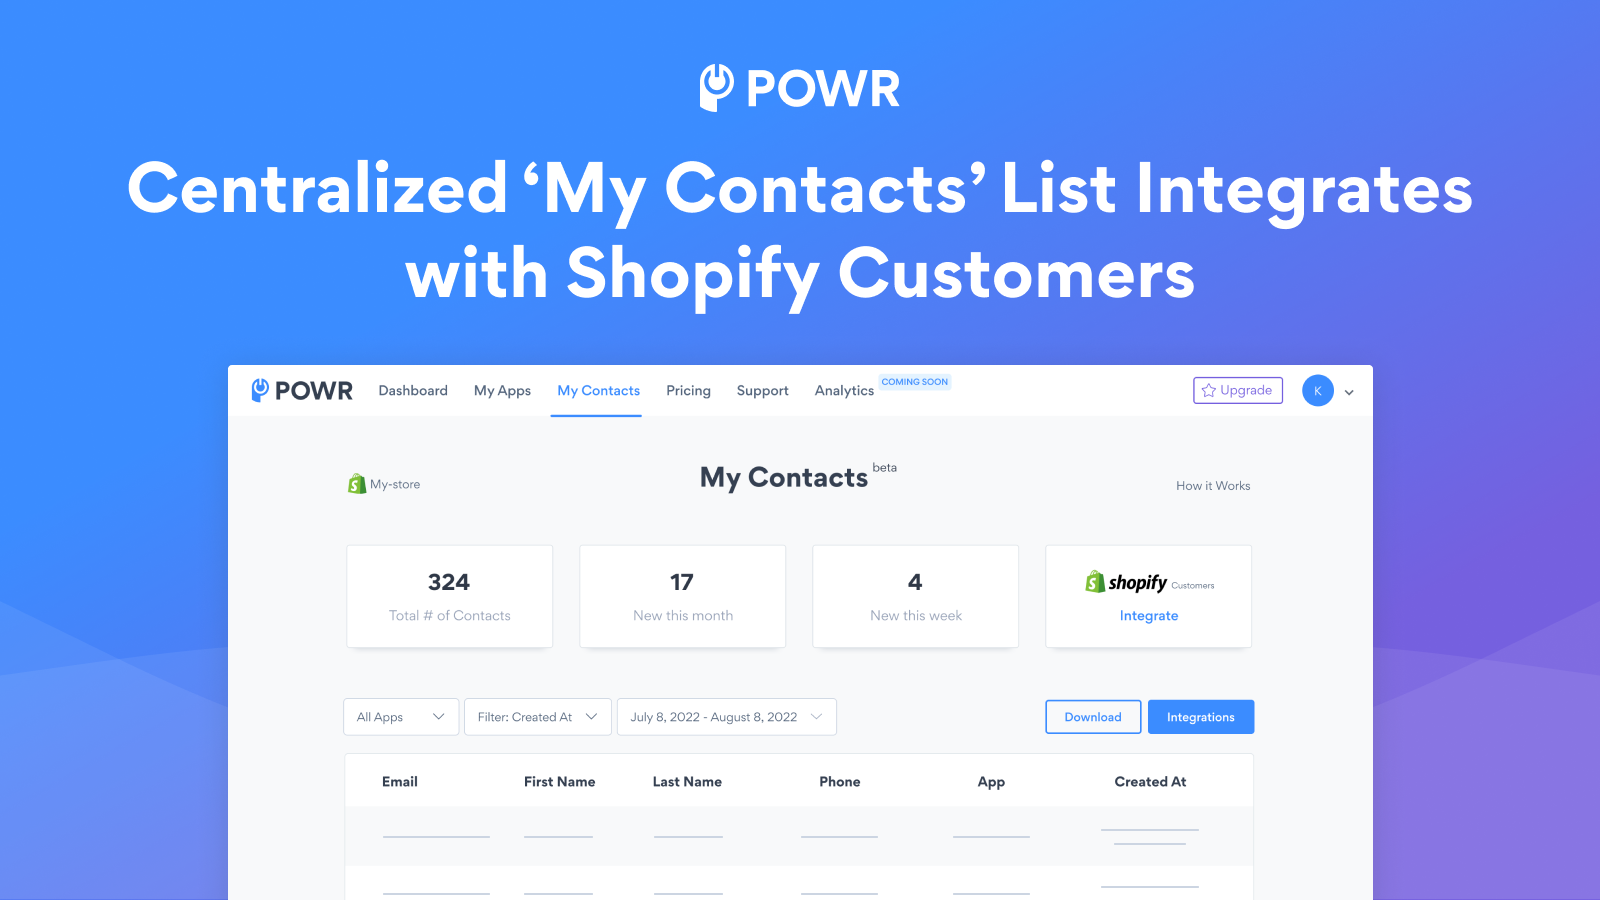 Sync My Contacts from your POWR dashboard with Shopify Customers